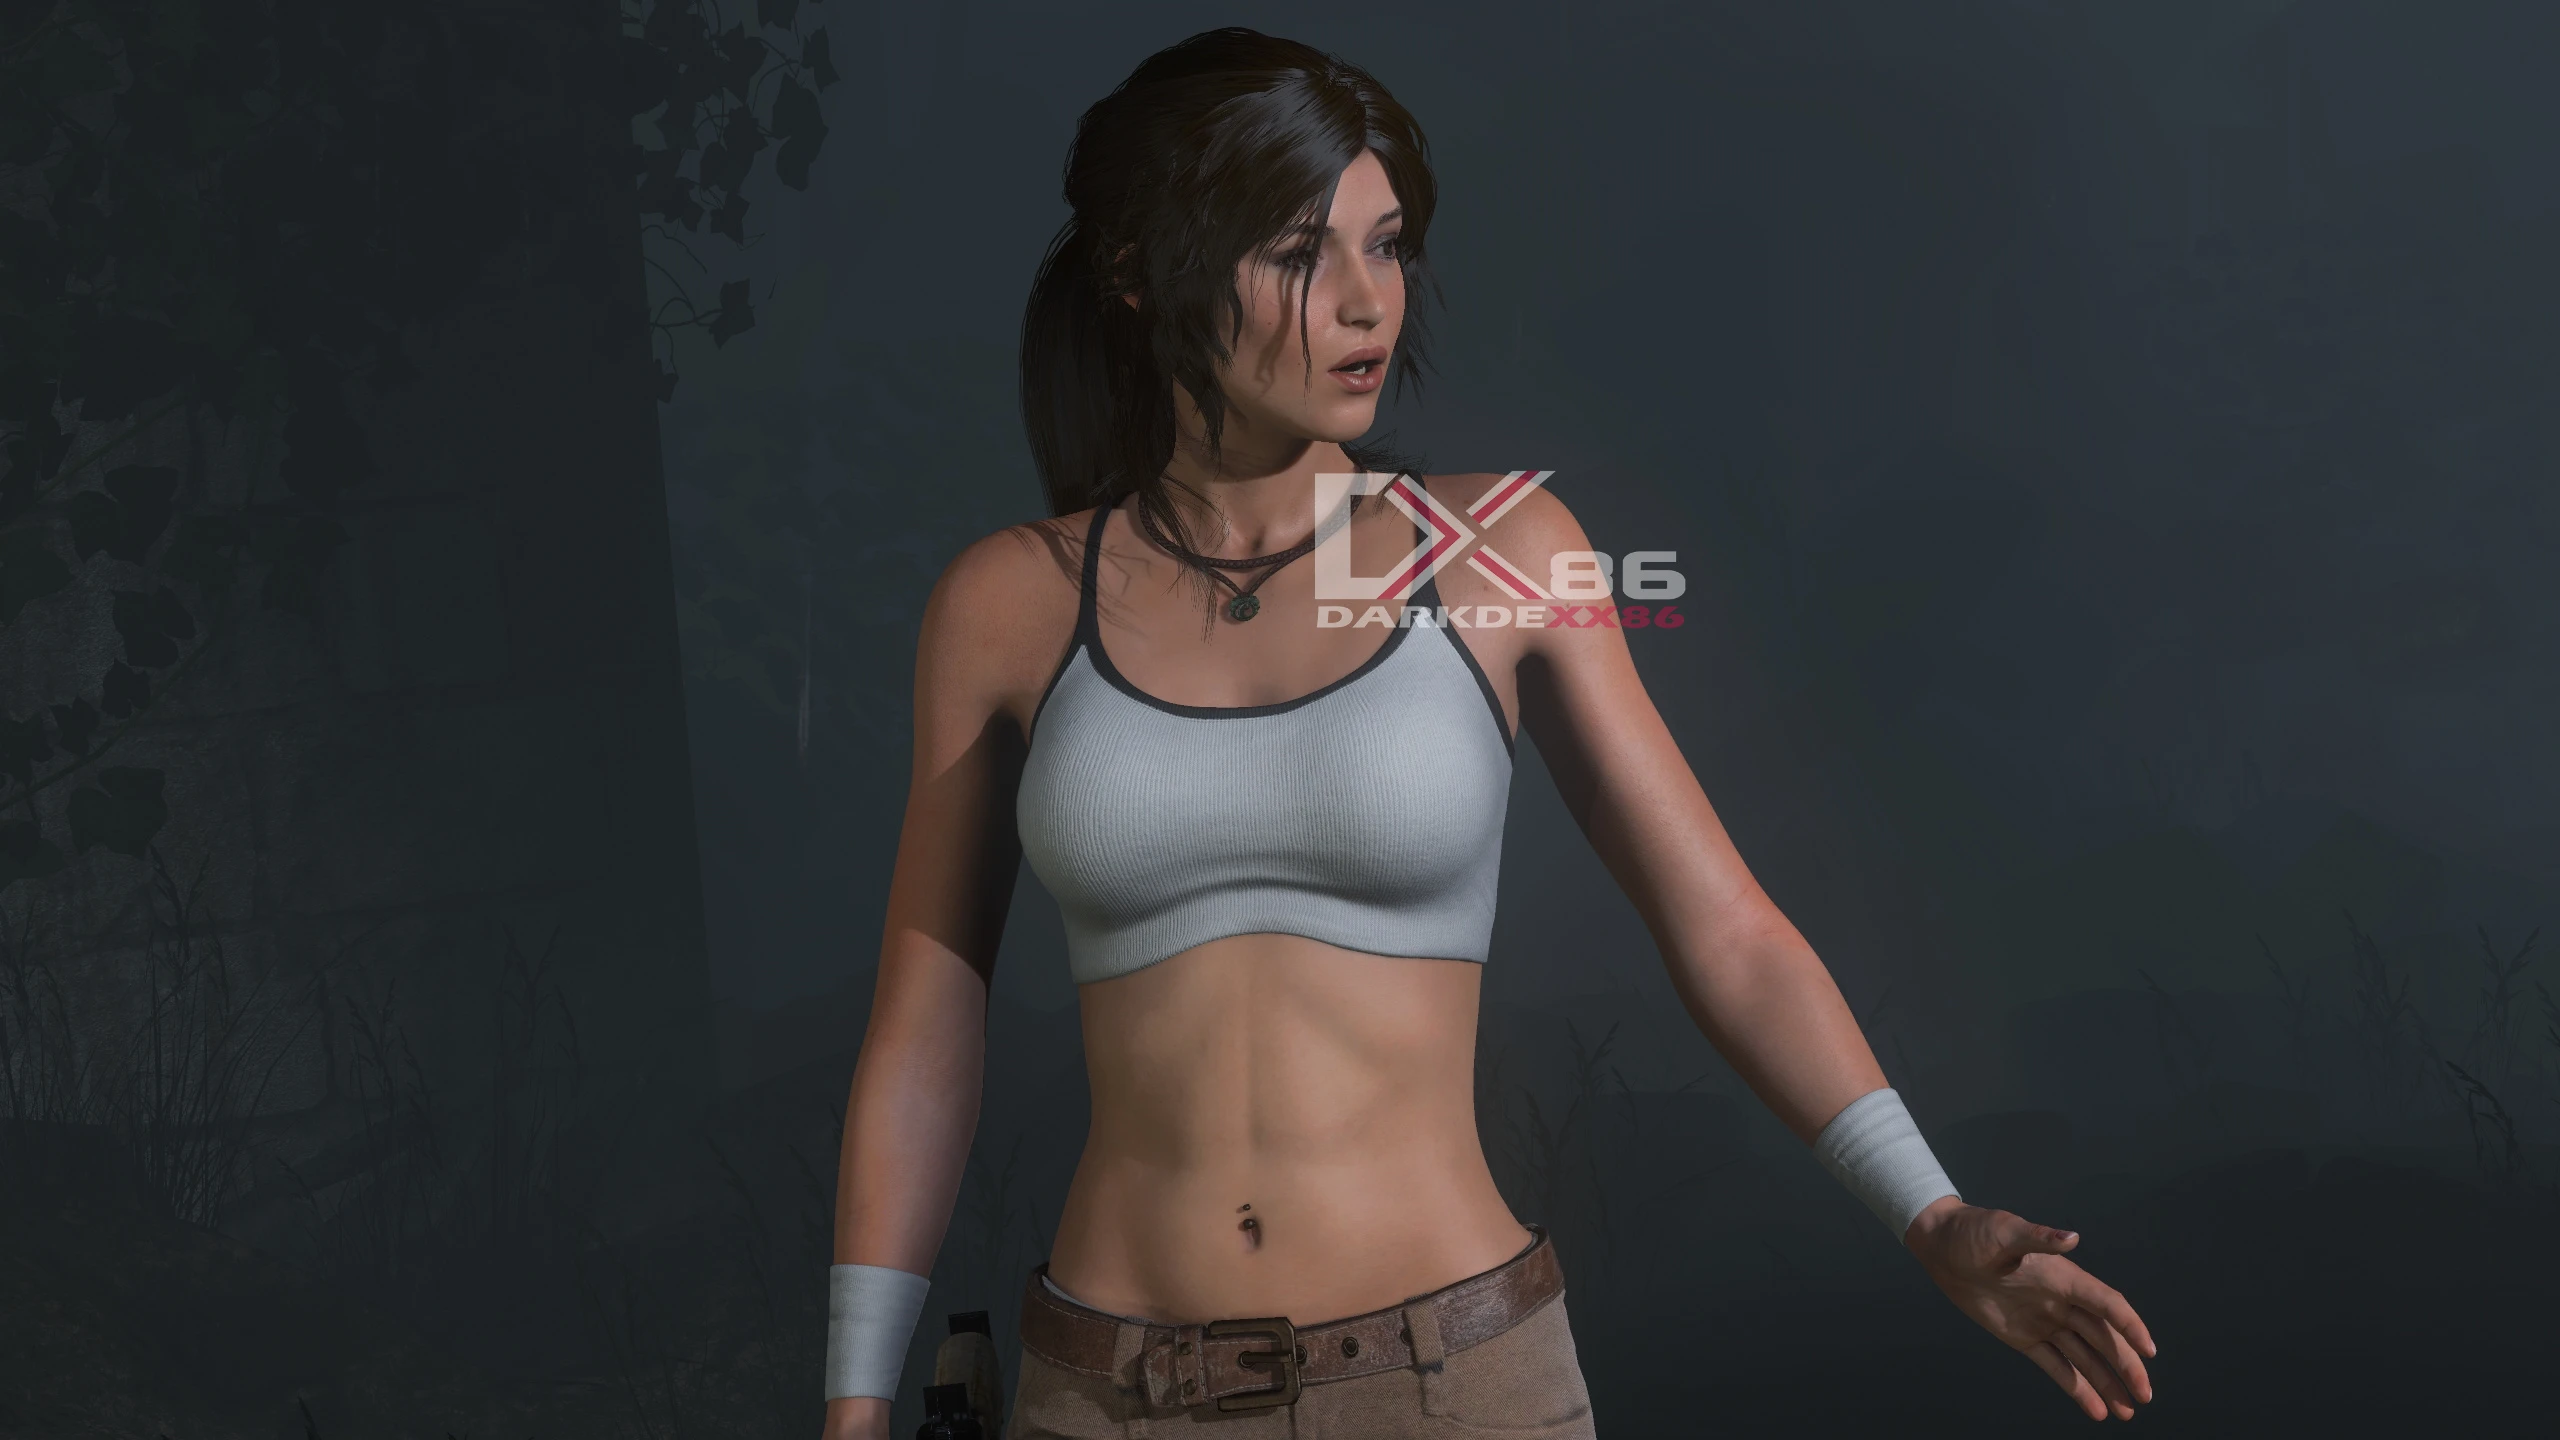 rise of the tomb raider mods